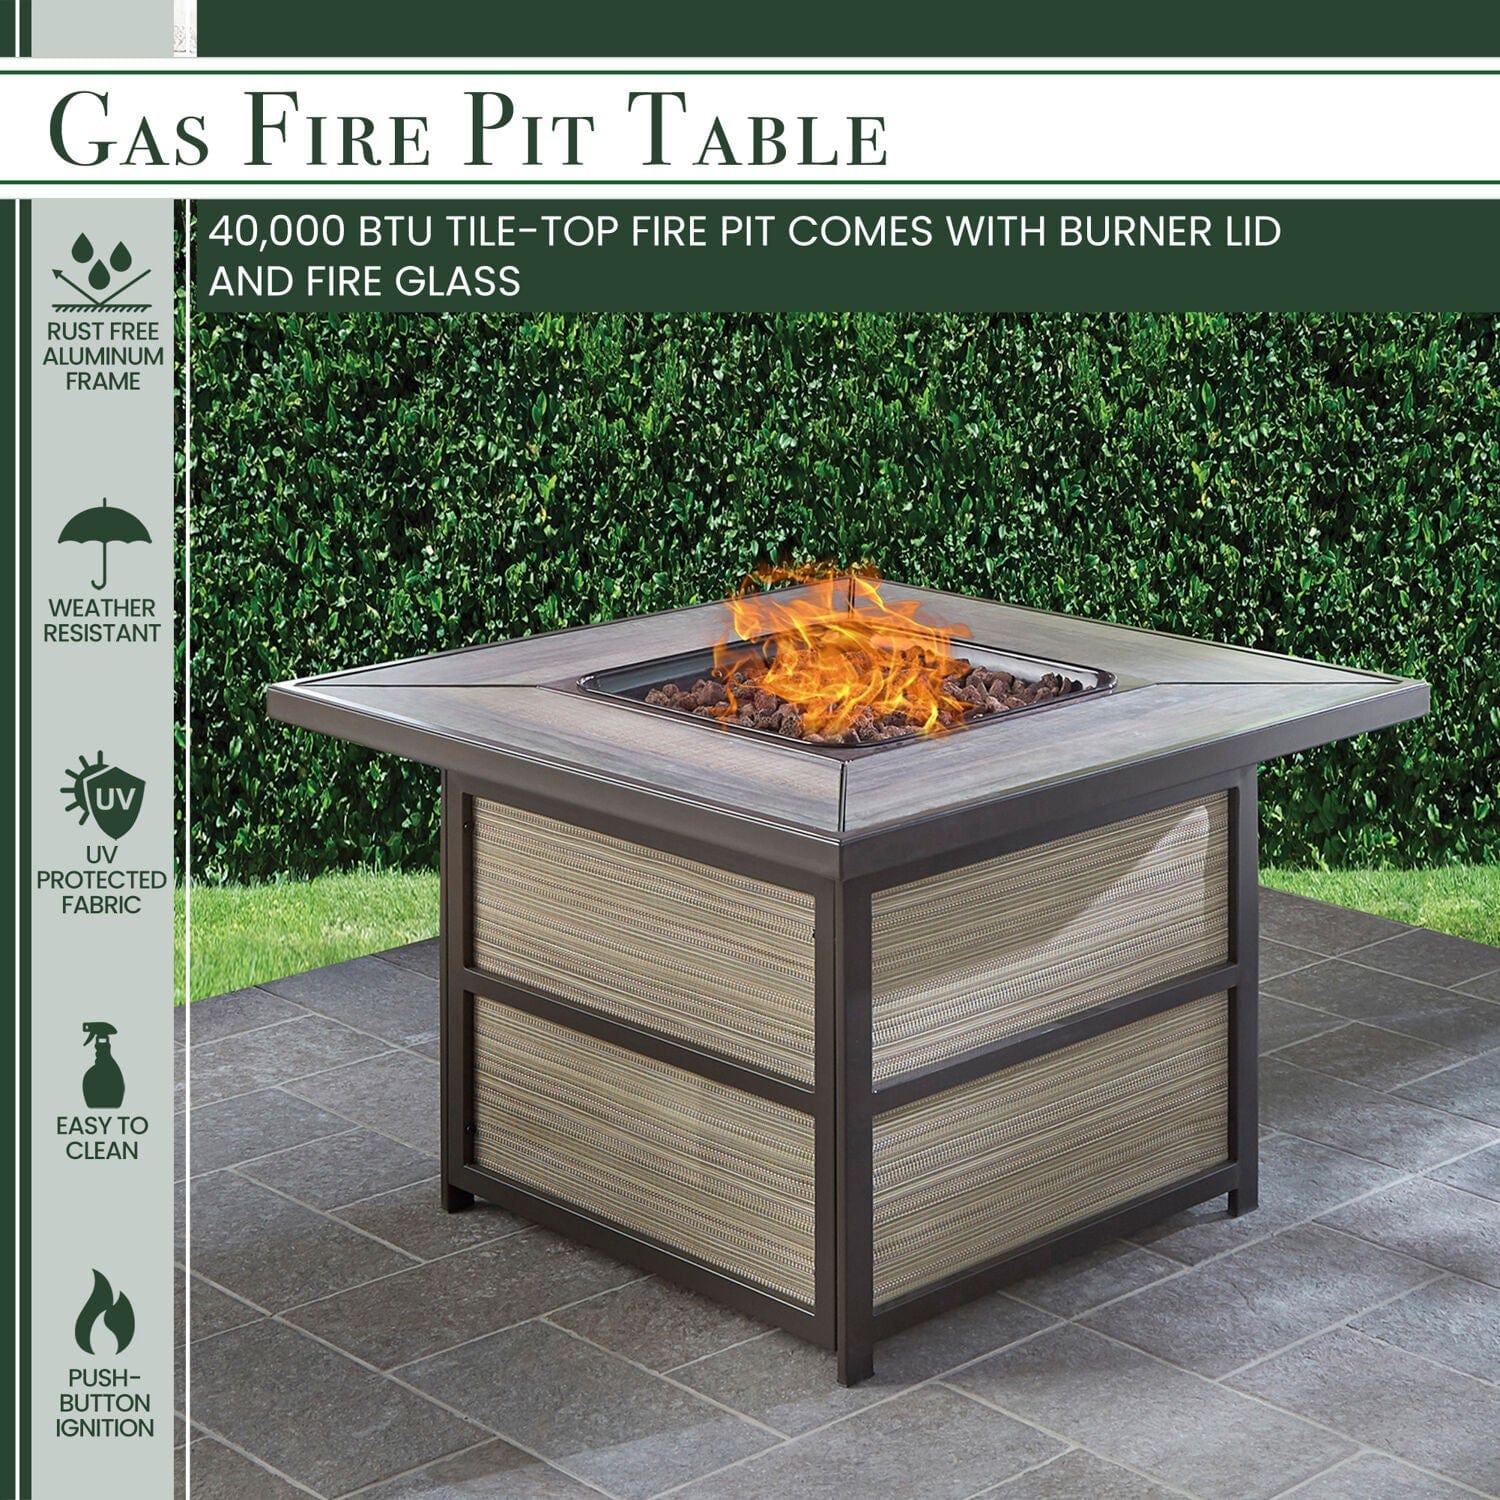 Hanover Fire Table Dining Set Hanover - Fontana 5-Piece Fire Pit Chat Set with 4 Sling Swivel Rockers and a 40,000 BTU Gas Durastone Fire Pit Coffee Table | FON5PCDSW4FP